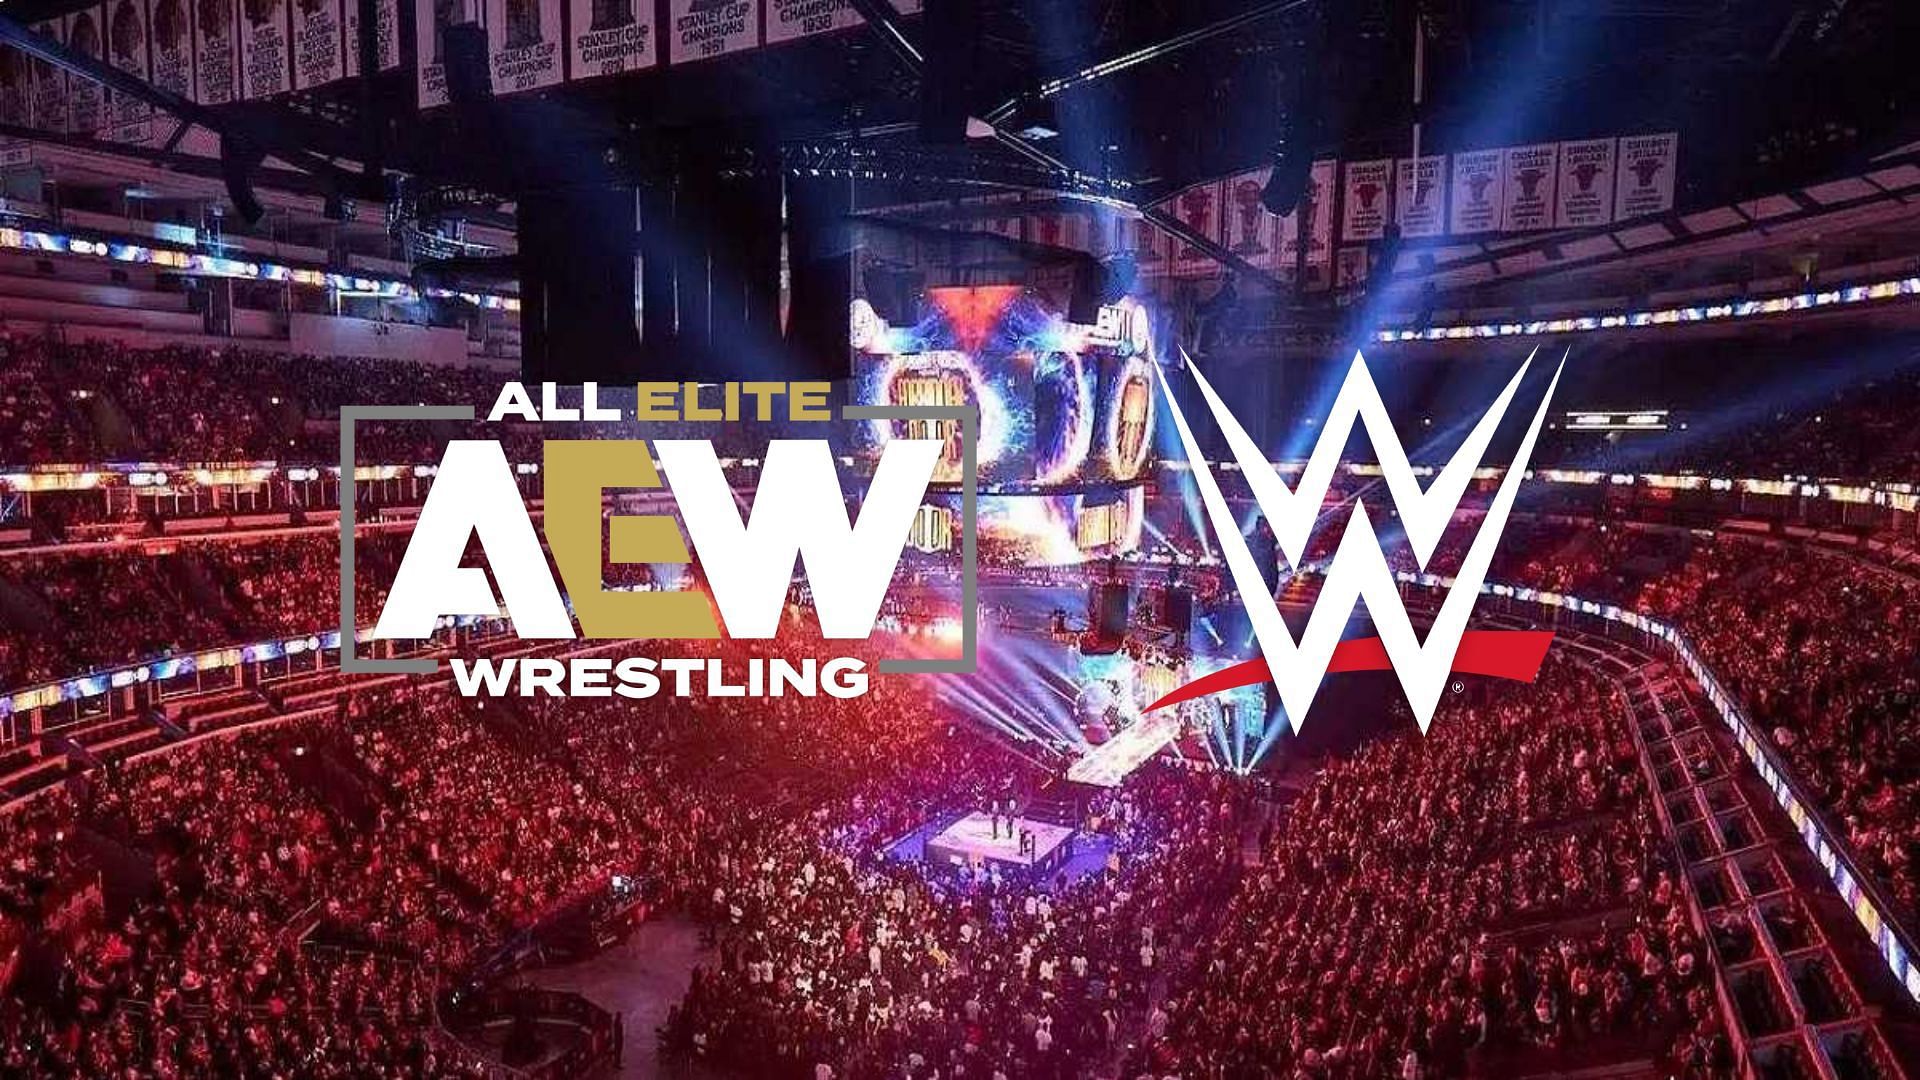 Find out which former WWE star is talking about the upcoming AEW match?